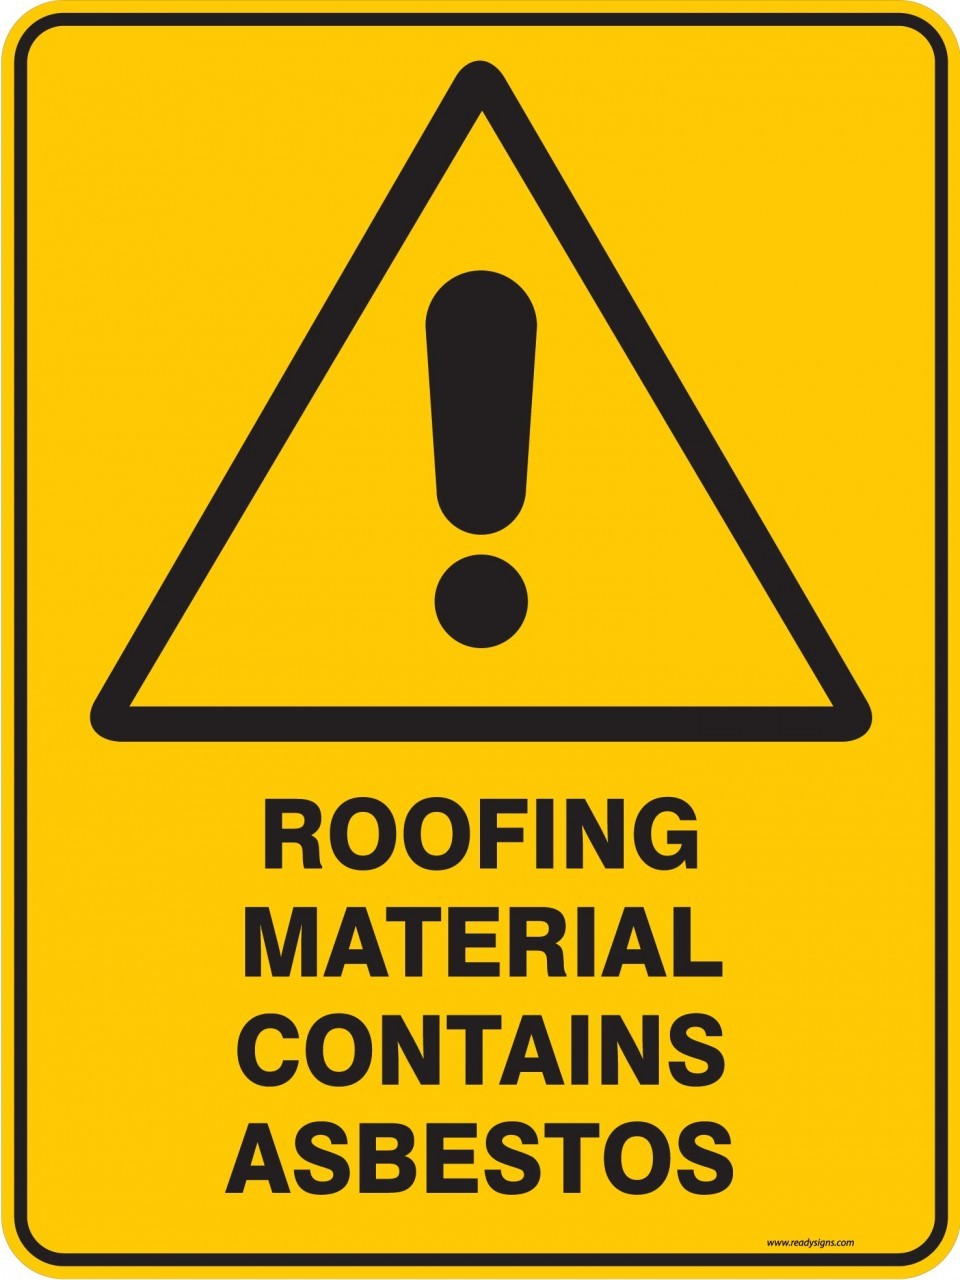 Warning Sign - ROOFING MATERIAL CONTAINS ASBESTOS - Property Signs